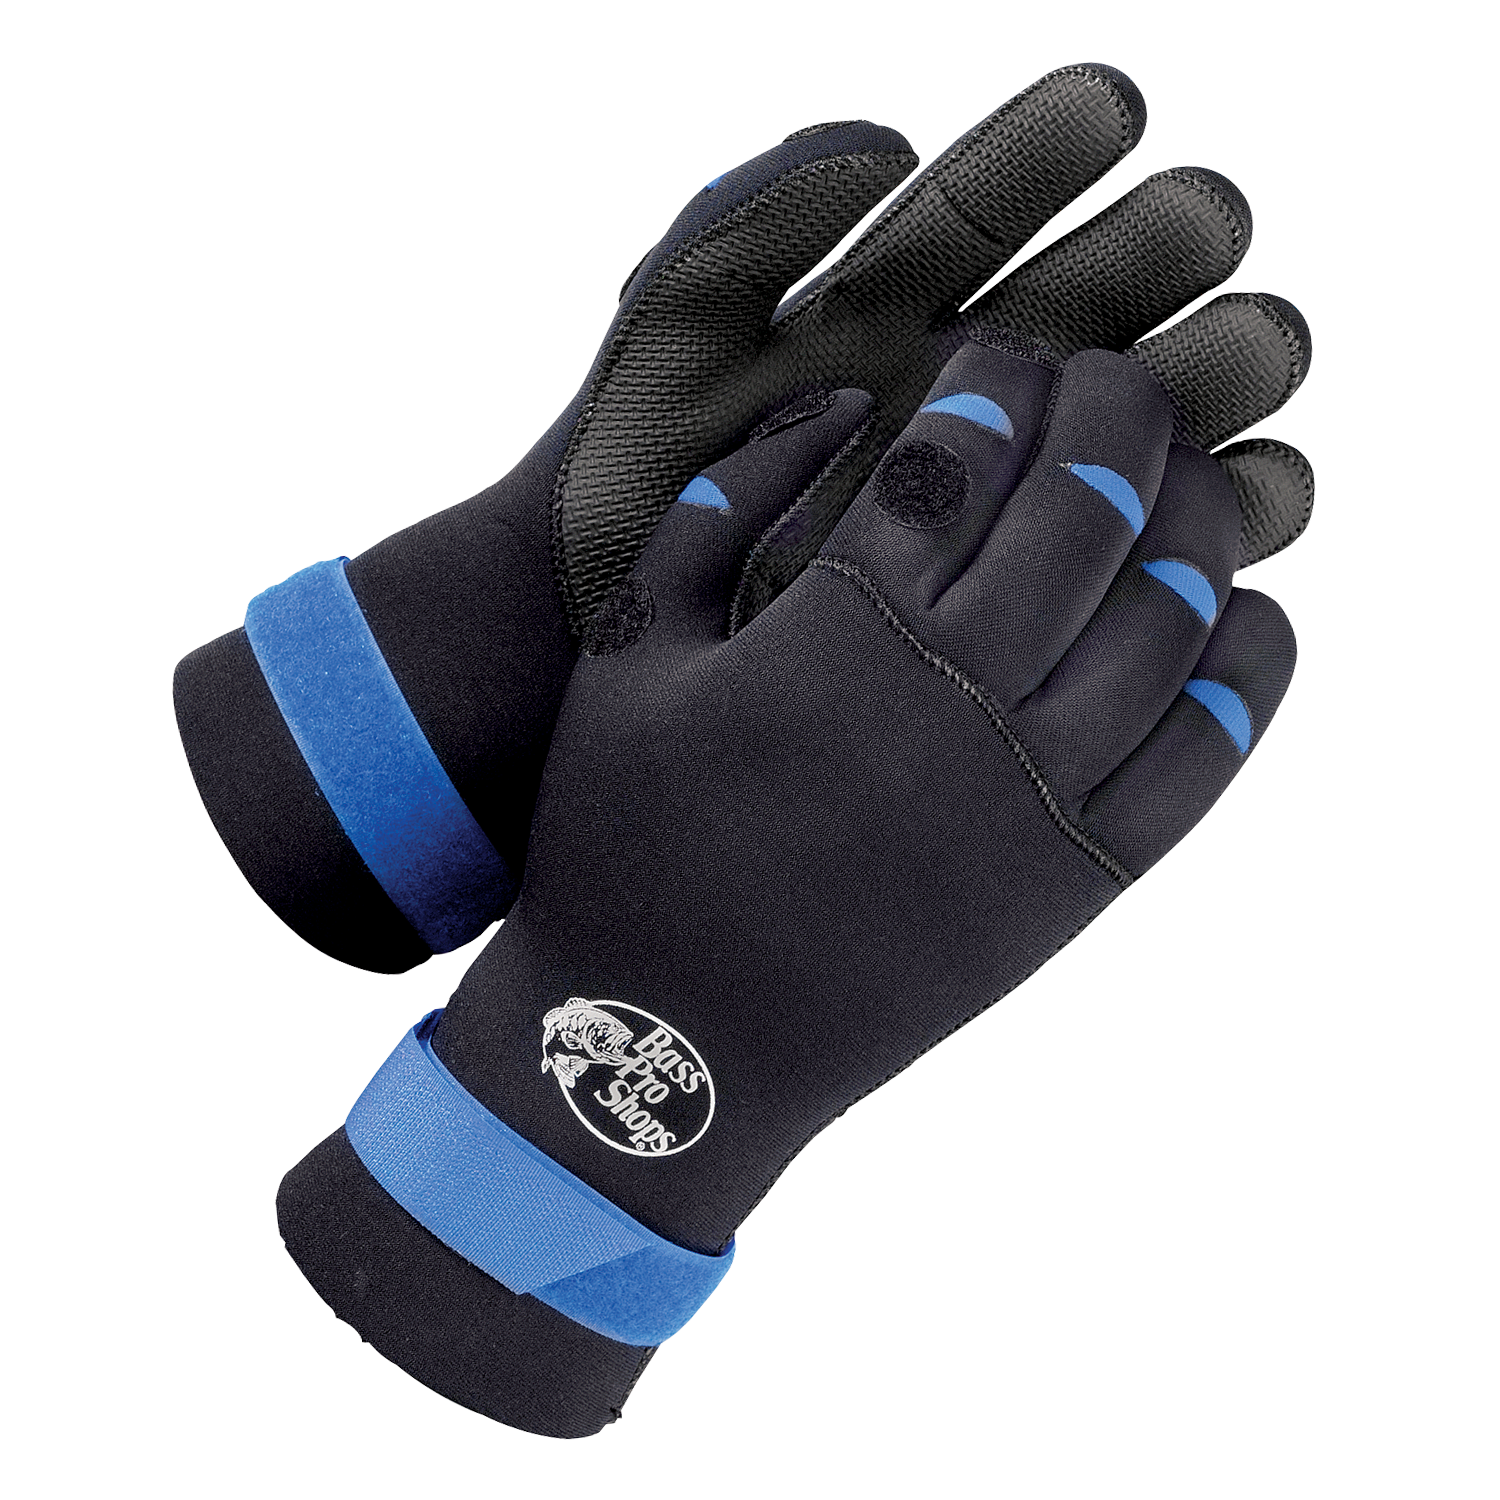 Shop Gloves: Commerical Fishing, Hiking, Sailing, Food Prep, Safety Gloves